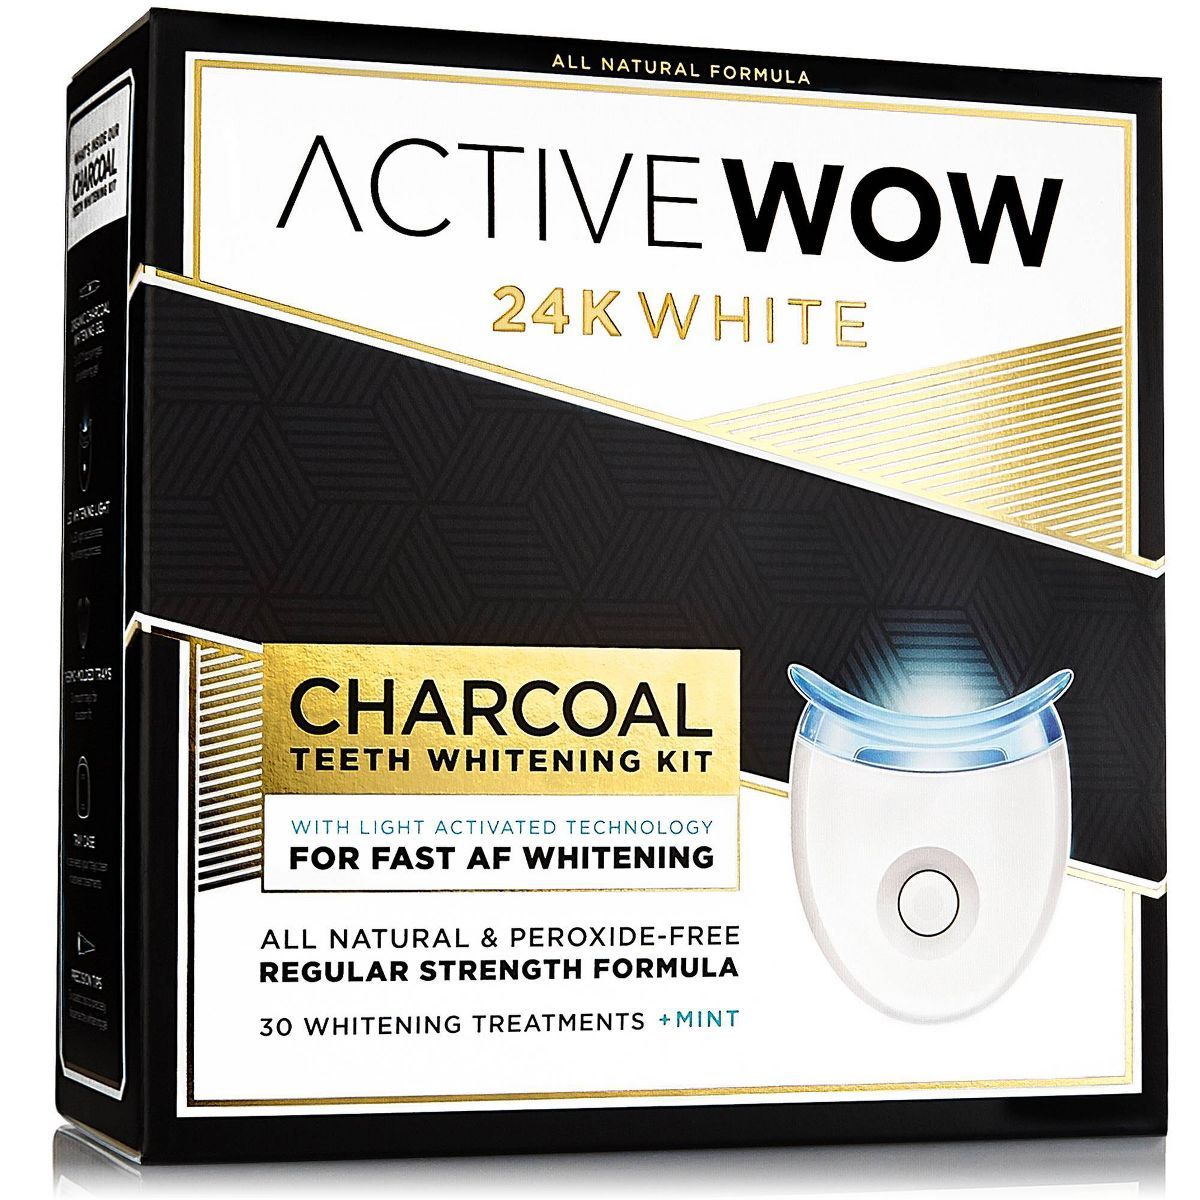 Active Wow White Charcoal Teeth Whitening Kit | Target